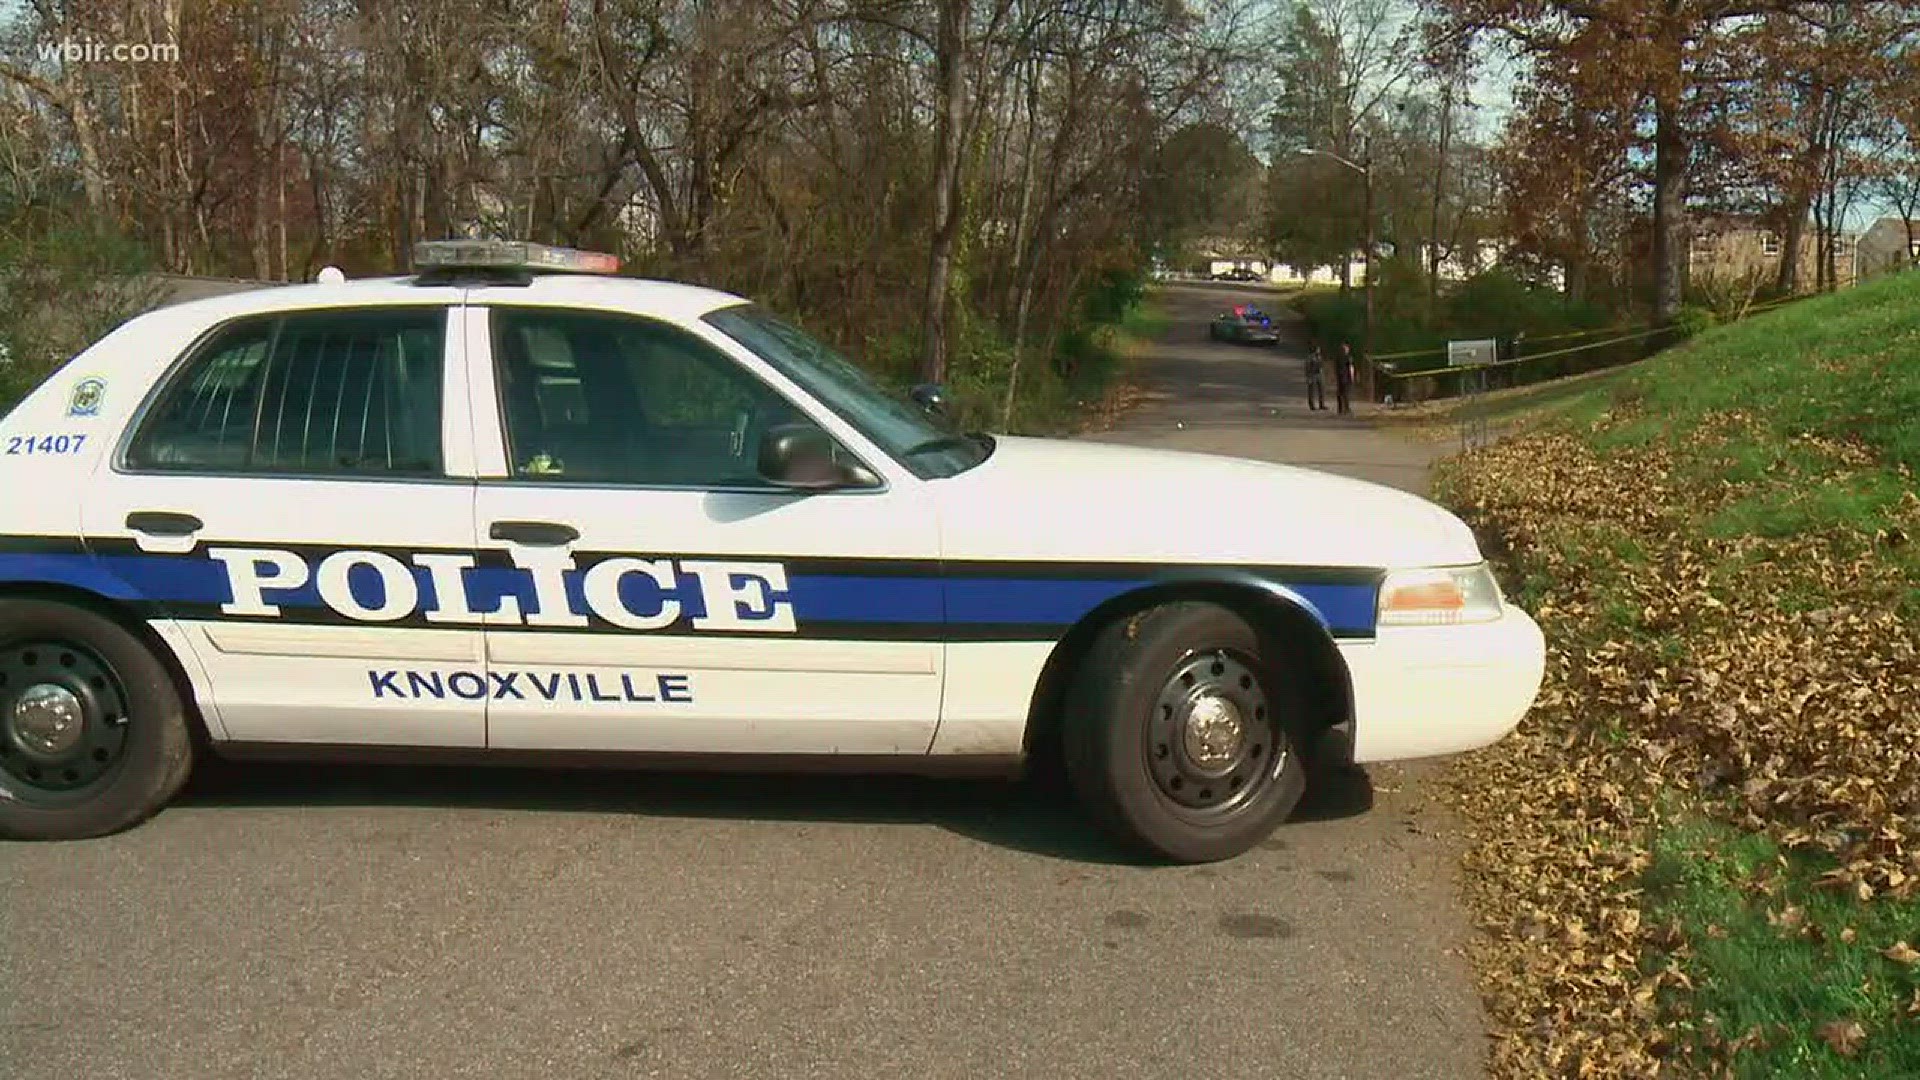 Nov. 23, 2017: A 21-year-old man was wounded in an East Knoxville shooting shortly before noon on Thanksgiving.